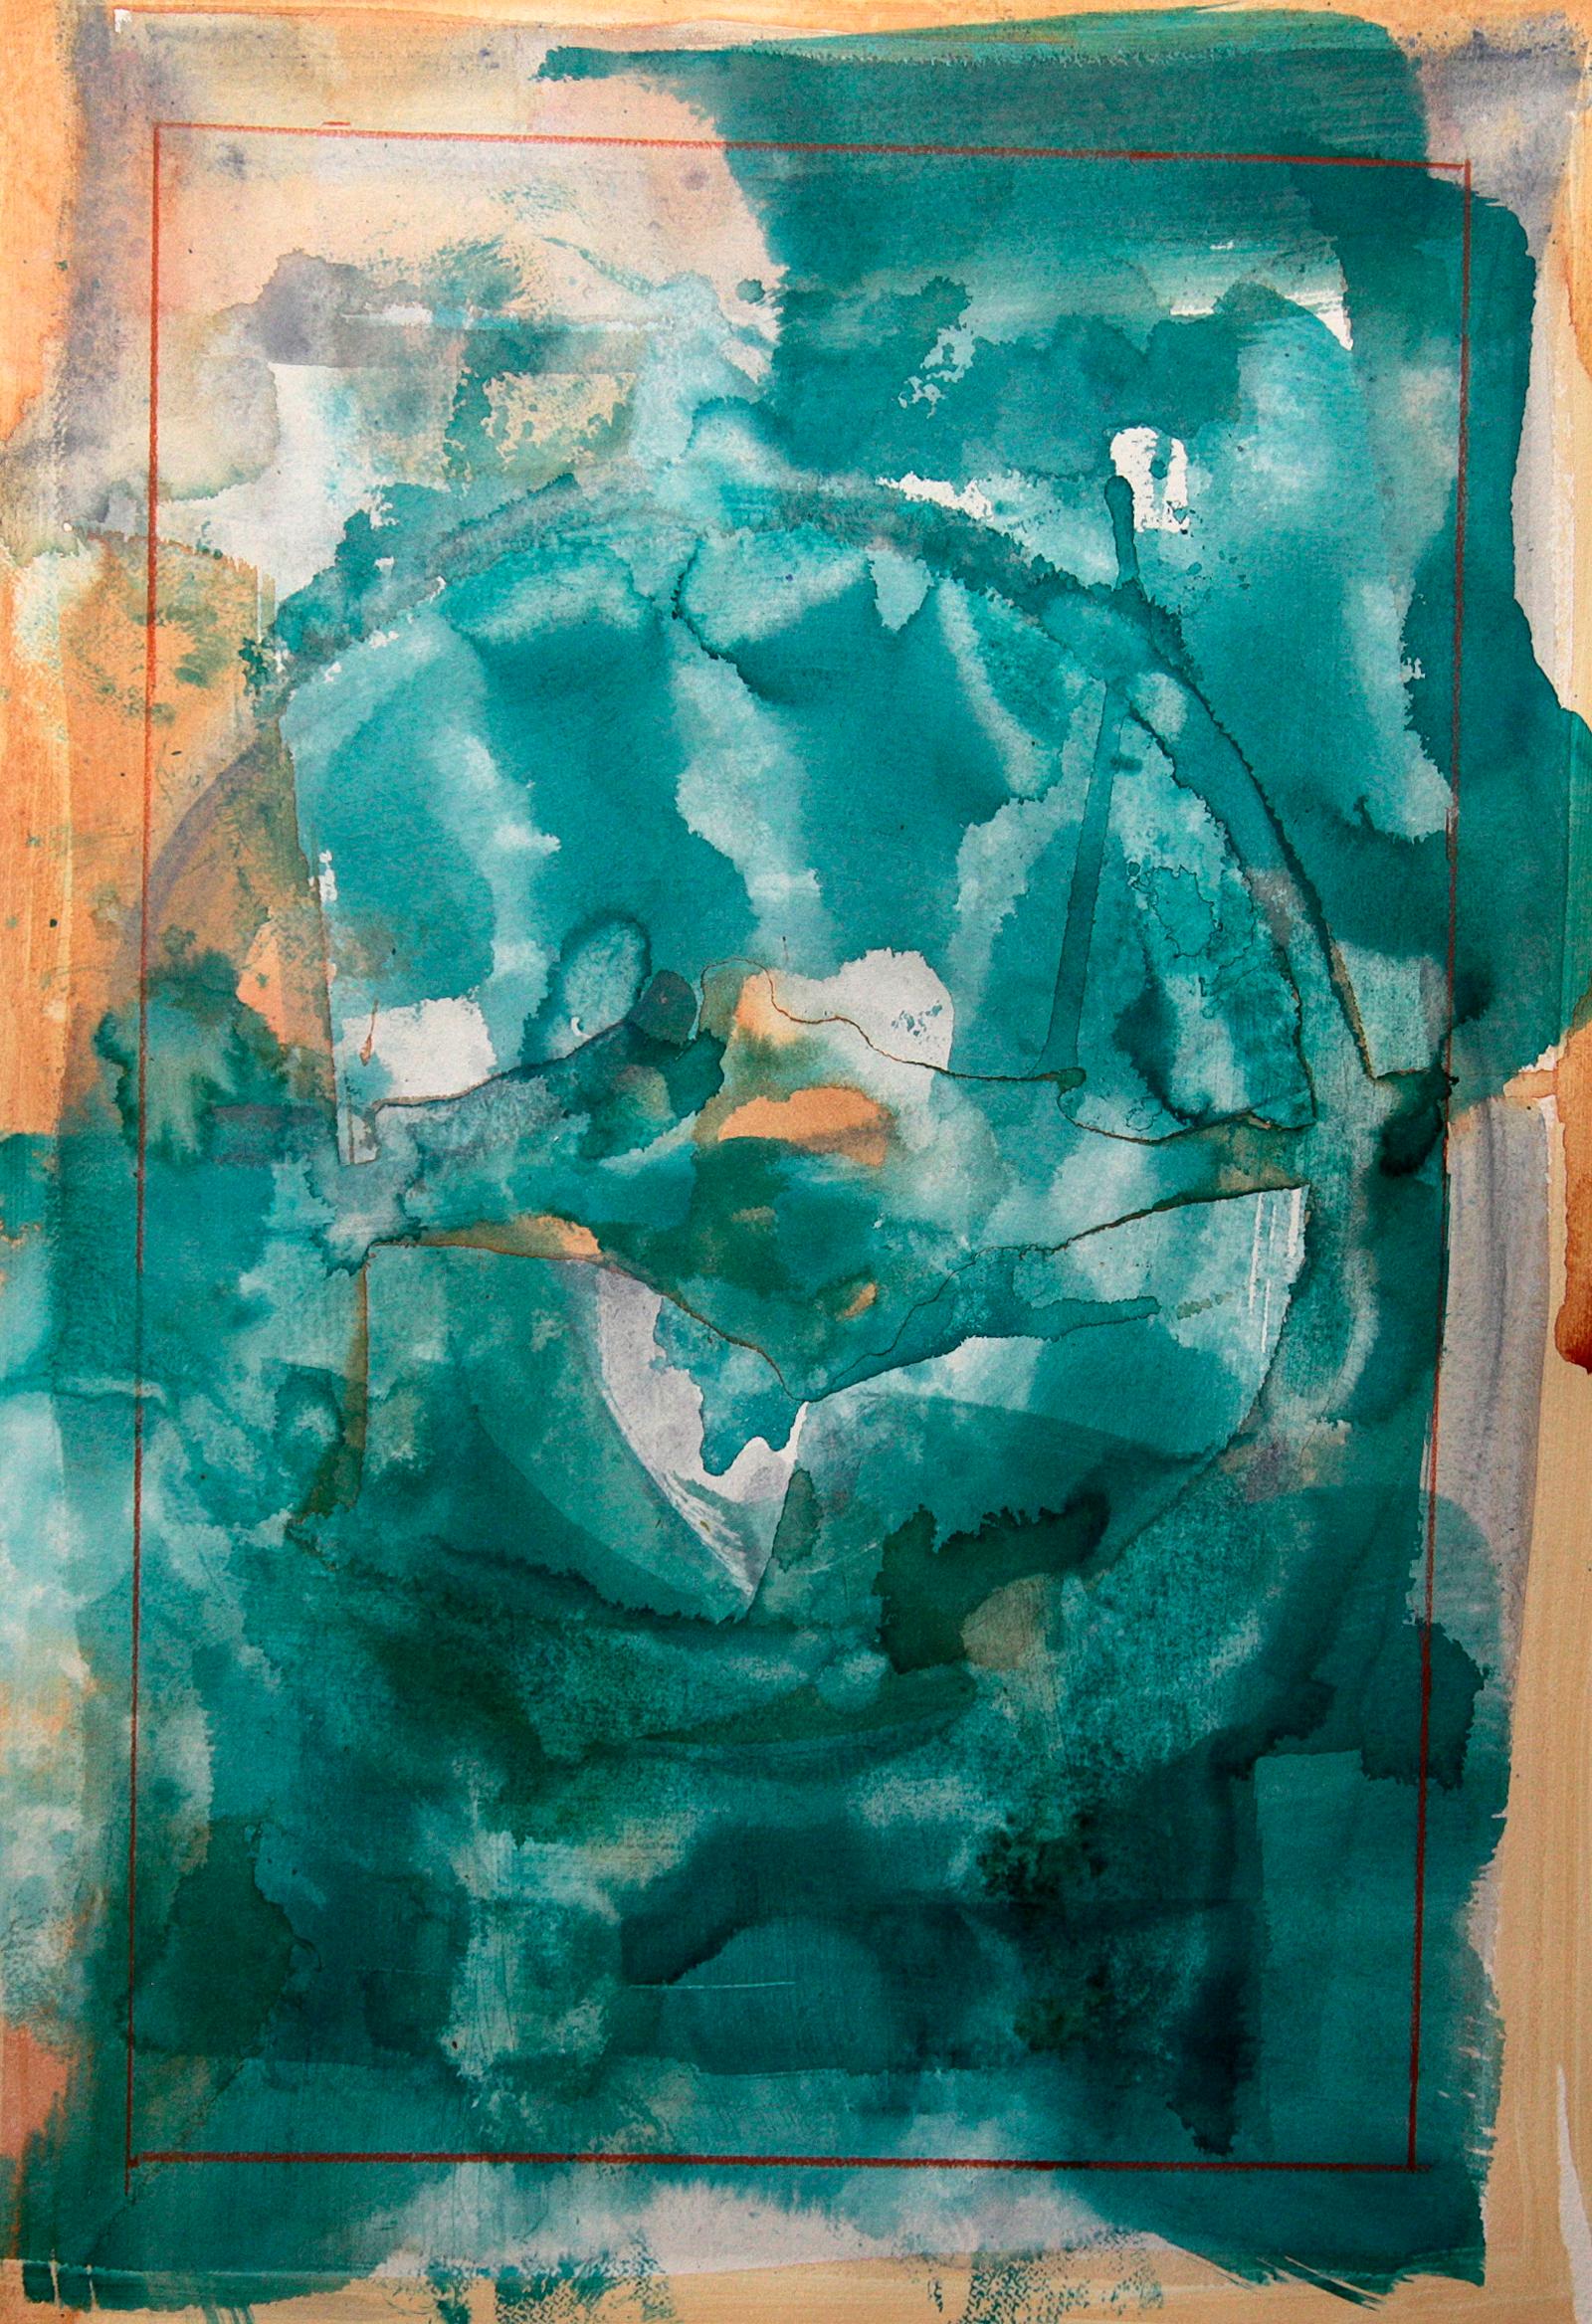  “Turquoise Terror”, in greens, stained on paper - Painting by Howard Nathenson